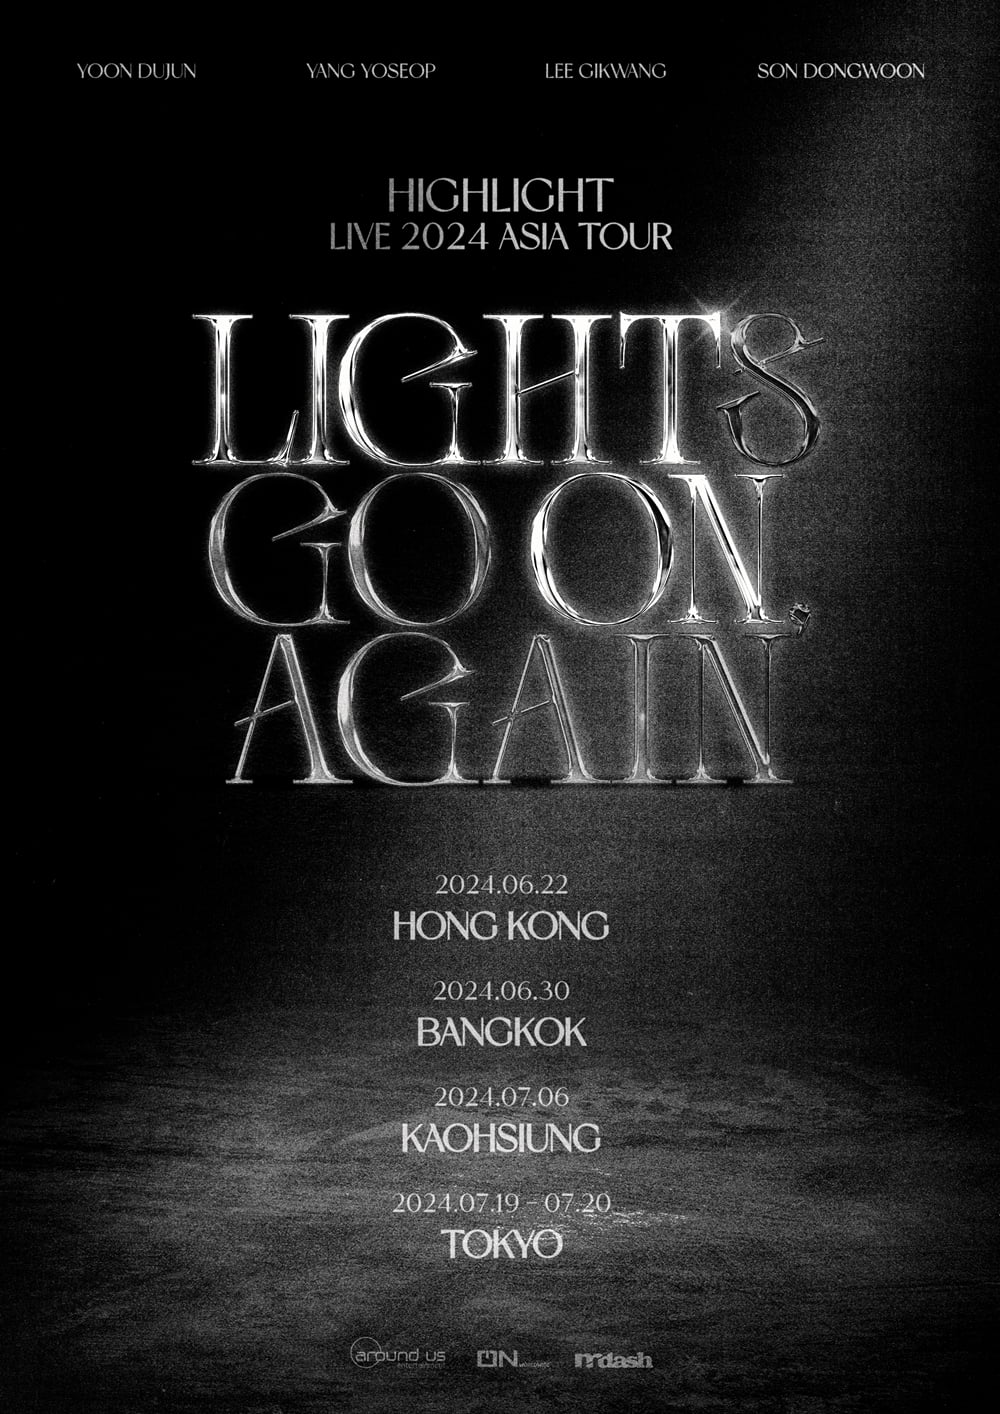 Highlight to hold Asia tour in June and July